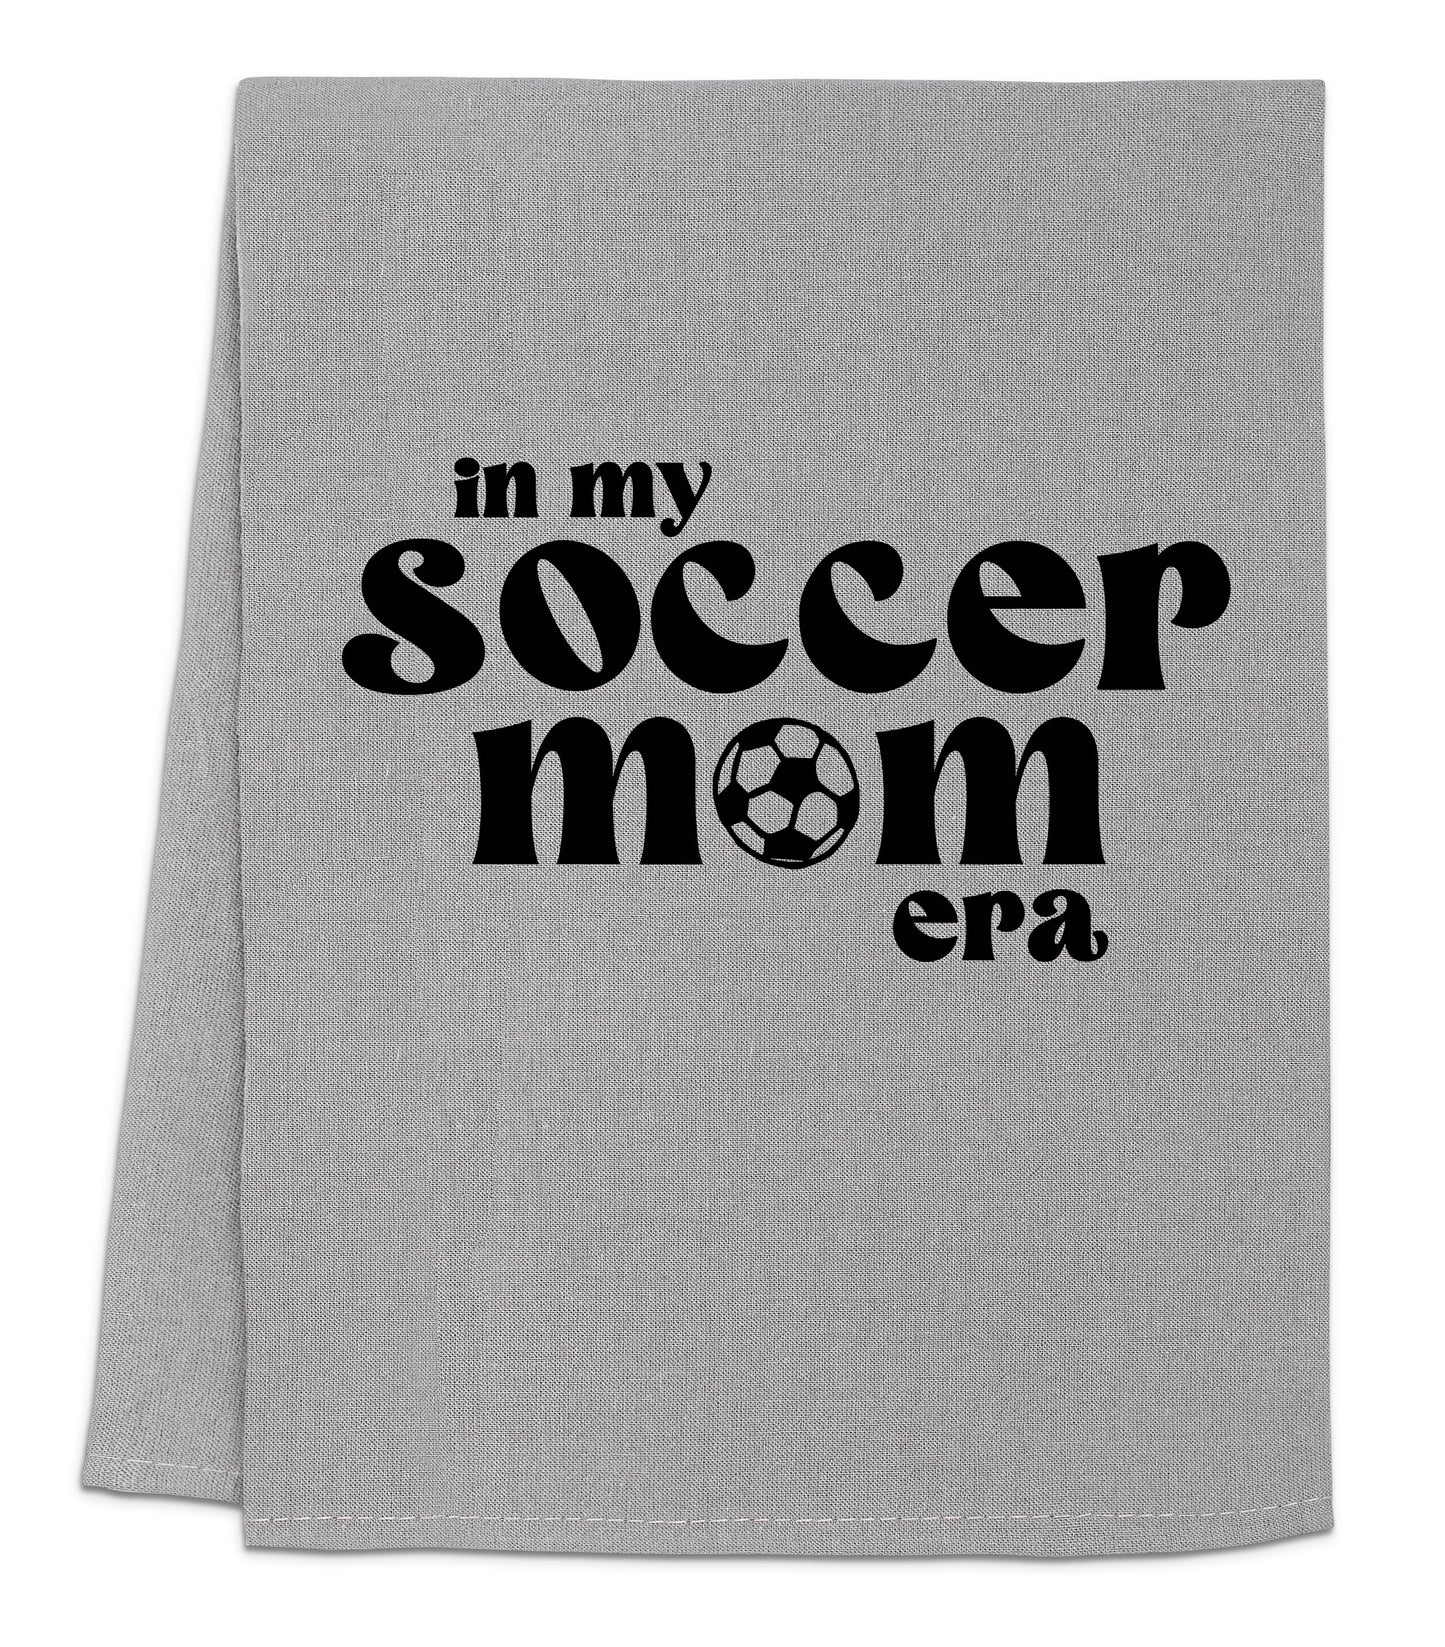 a gray towel with a soccer mom on it